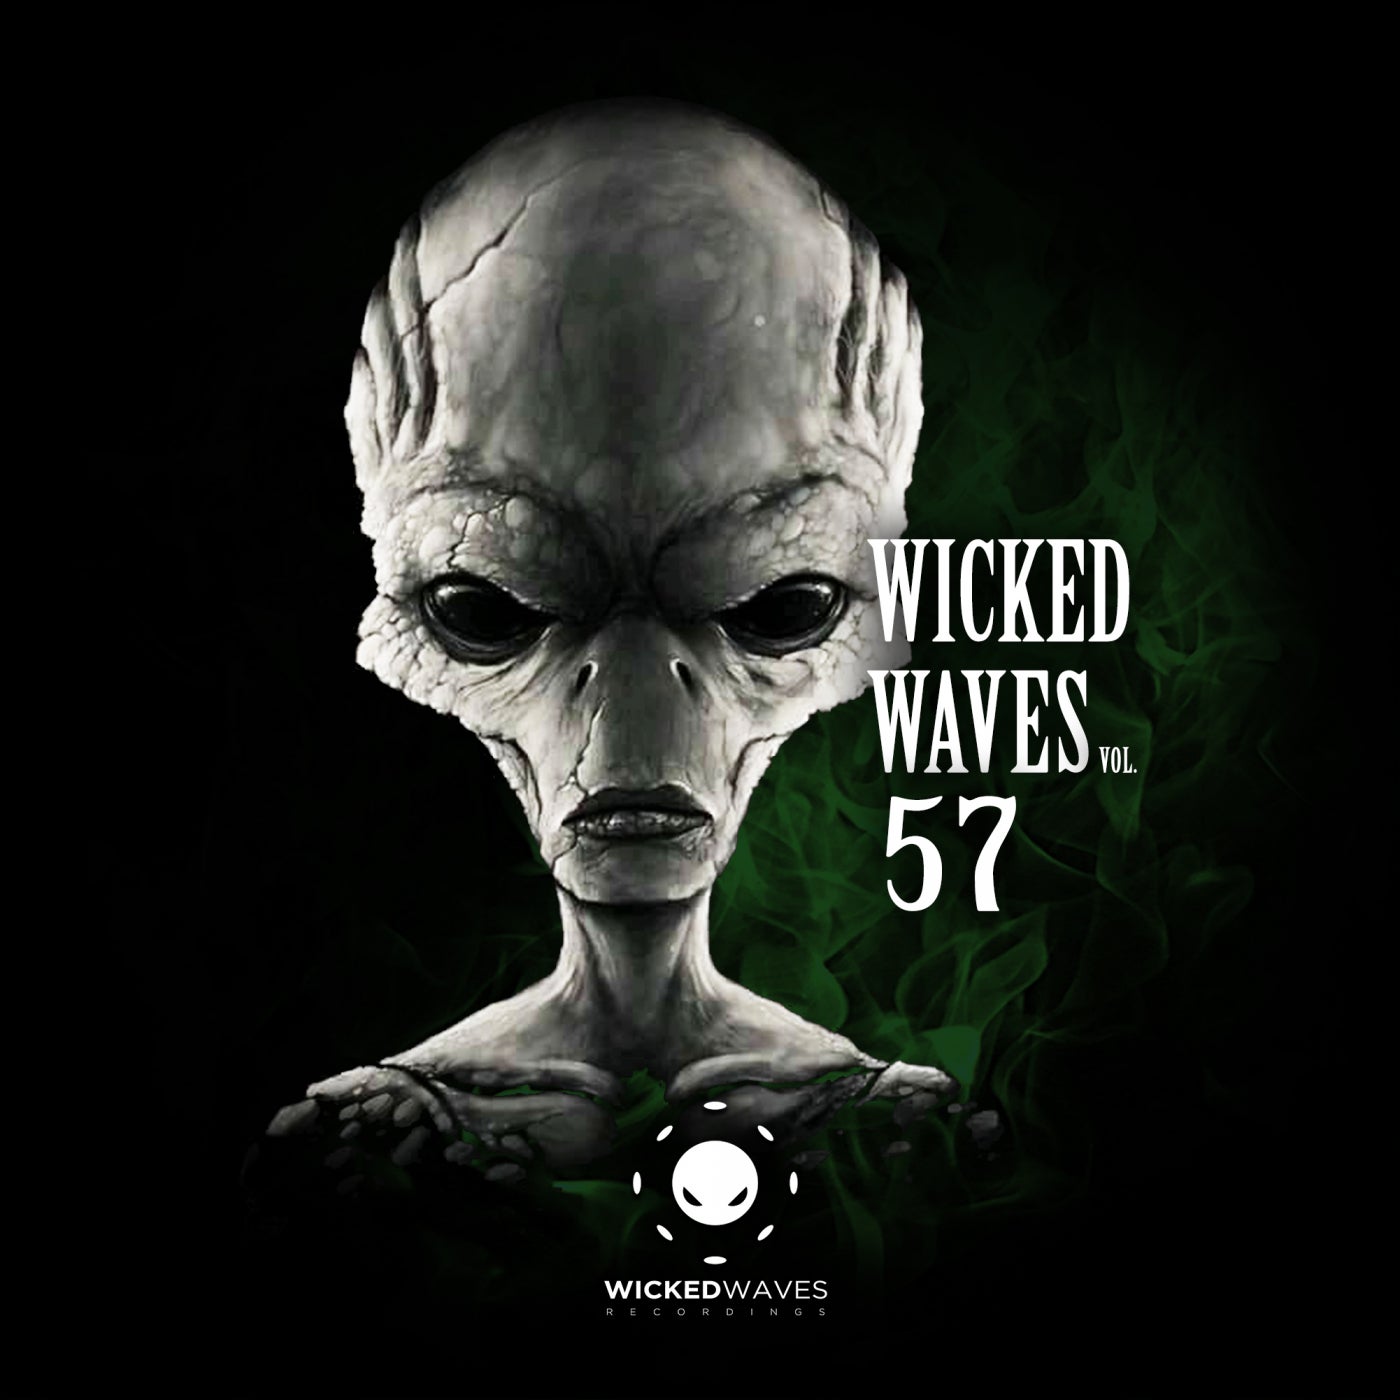 Wicked Waves Vol. 57